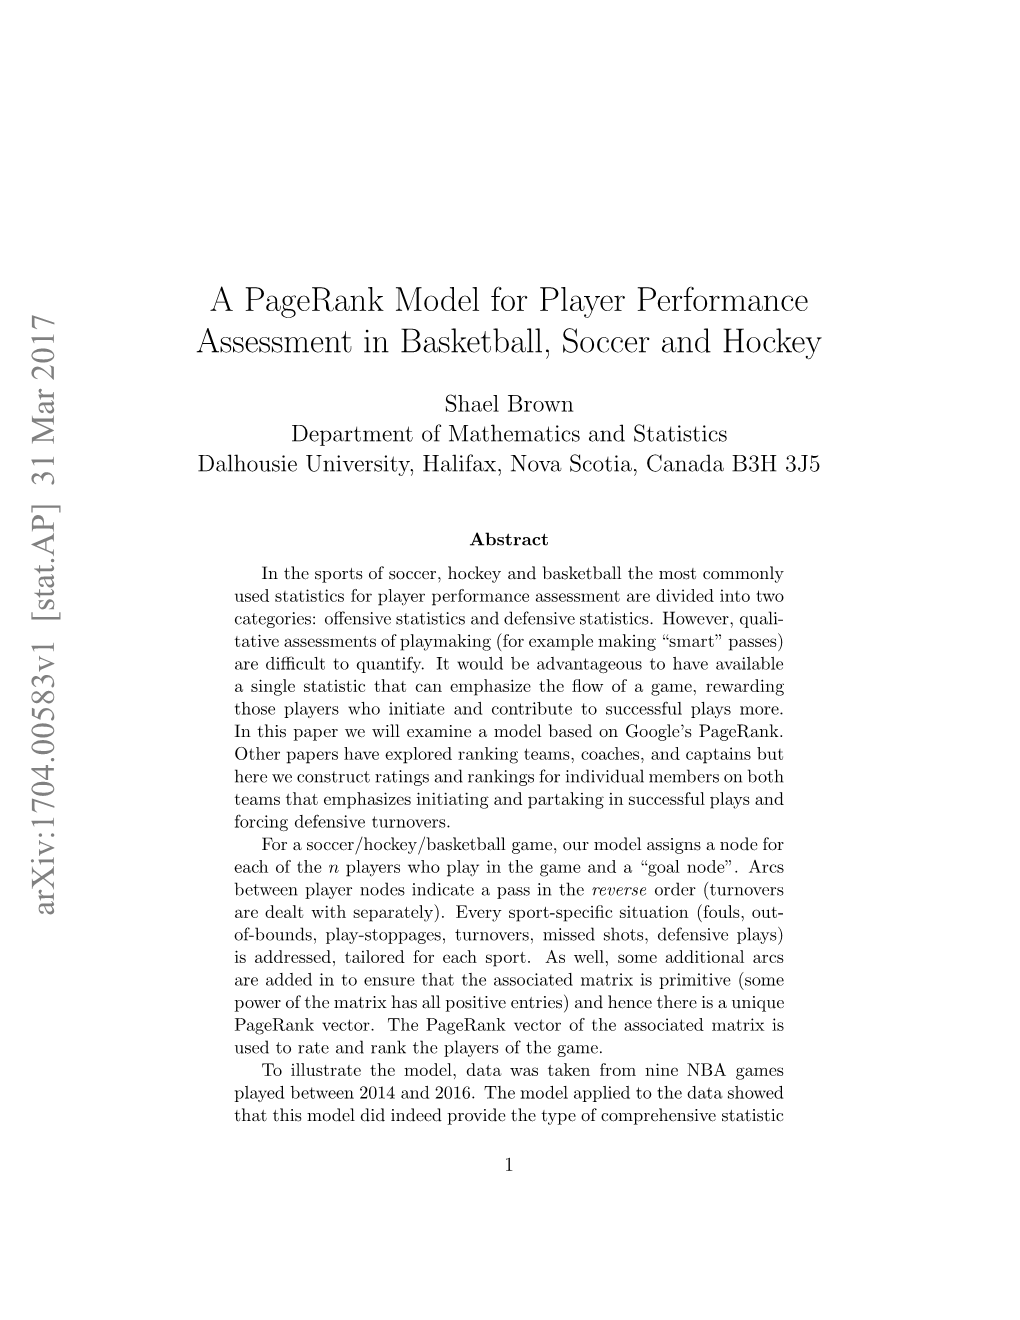 A Pagerank Model for Player Performance Assessment In